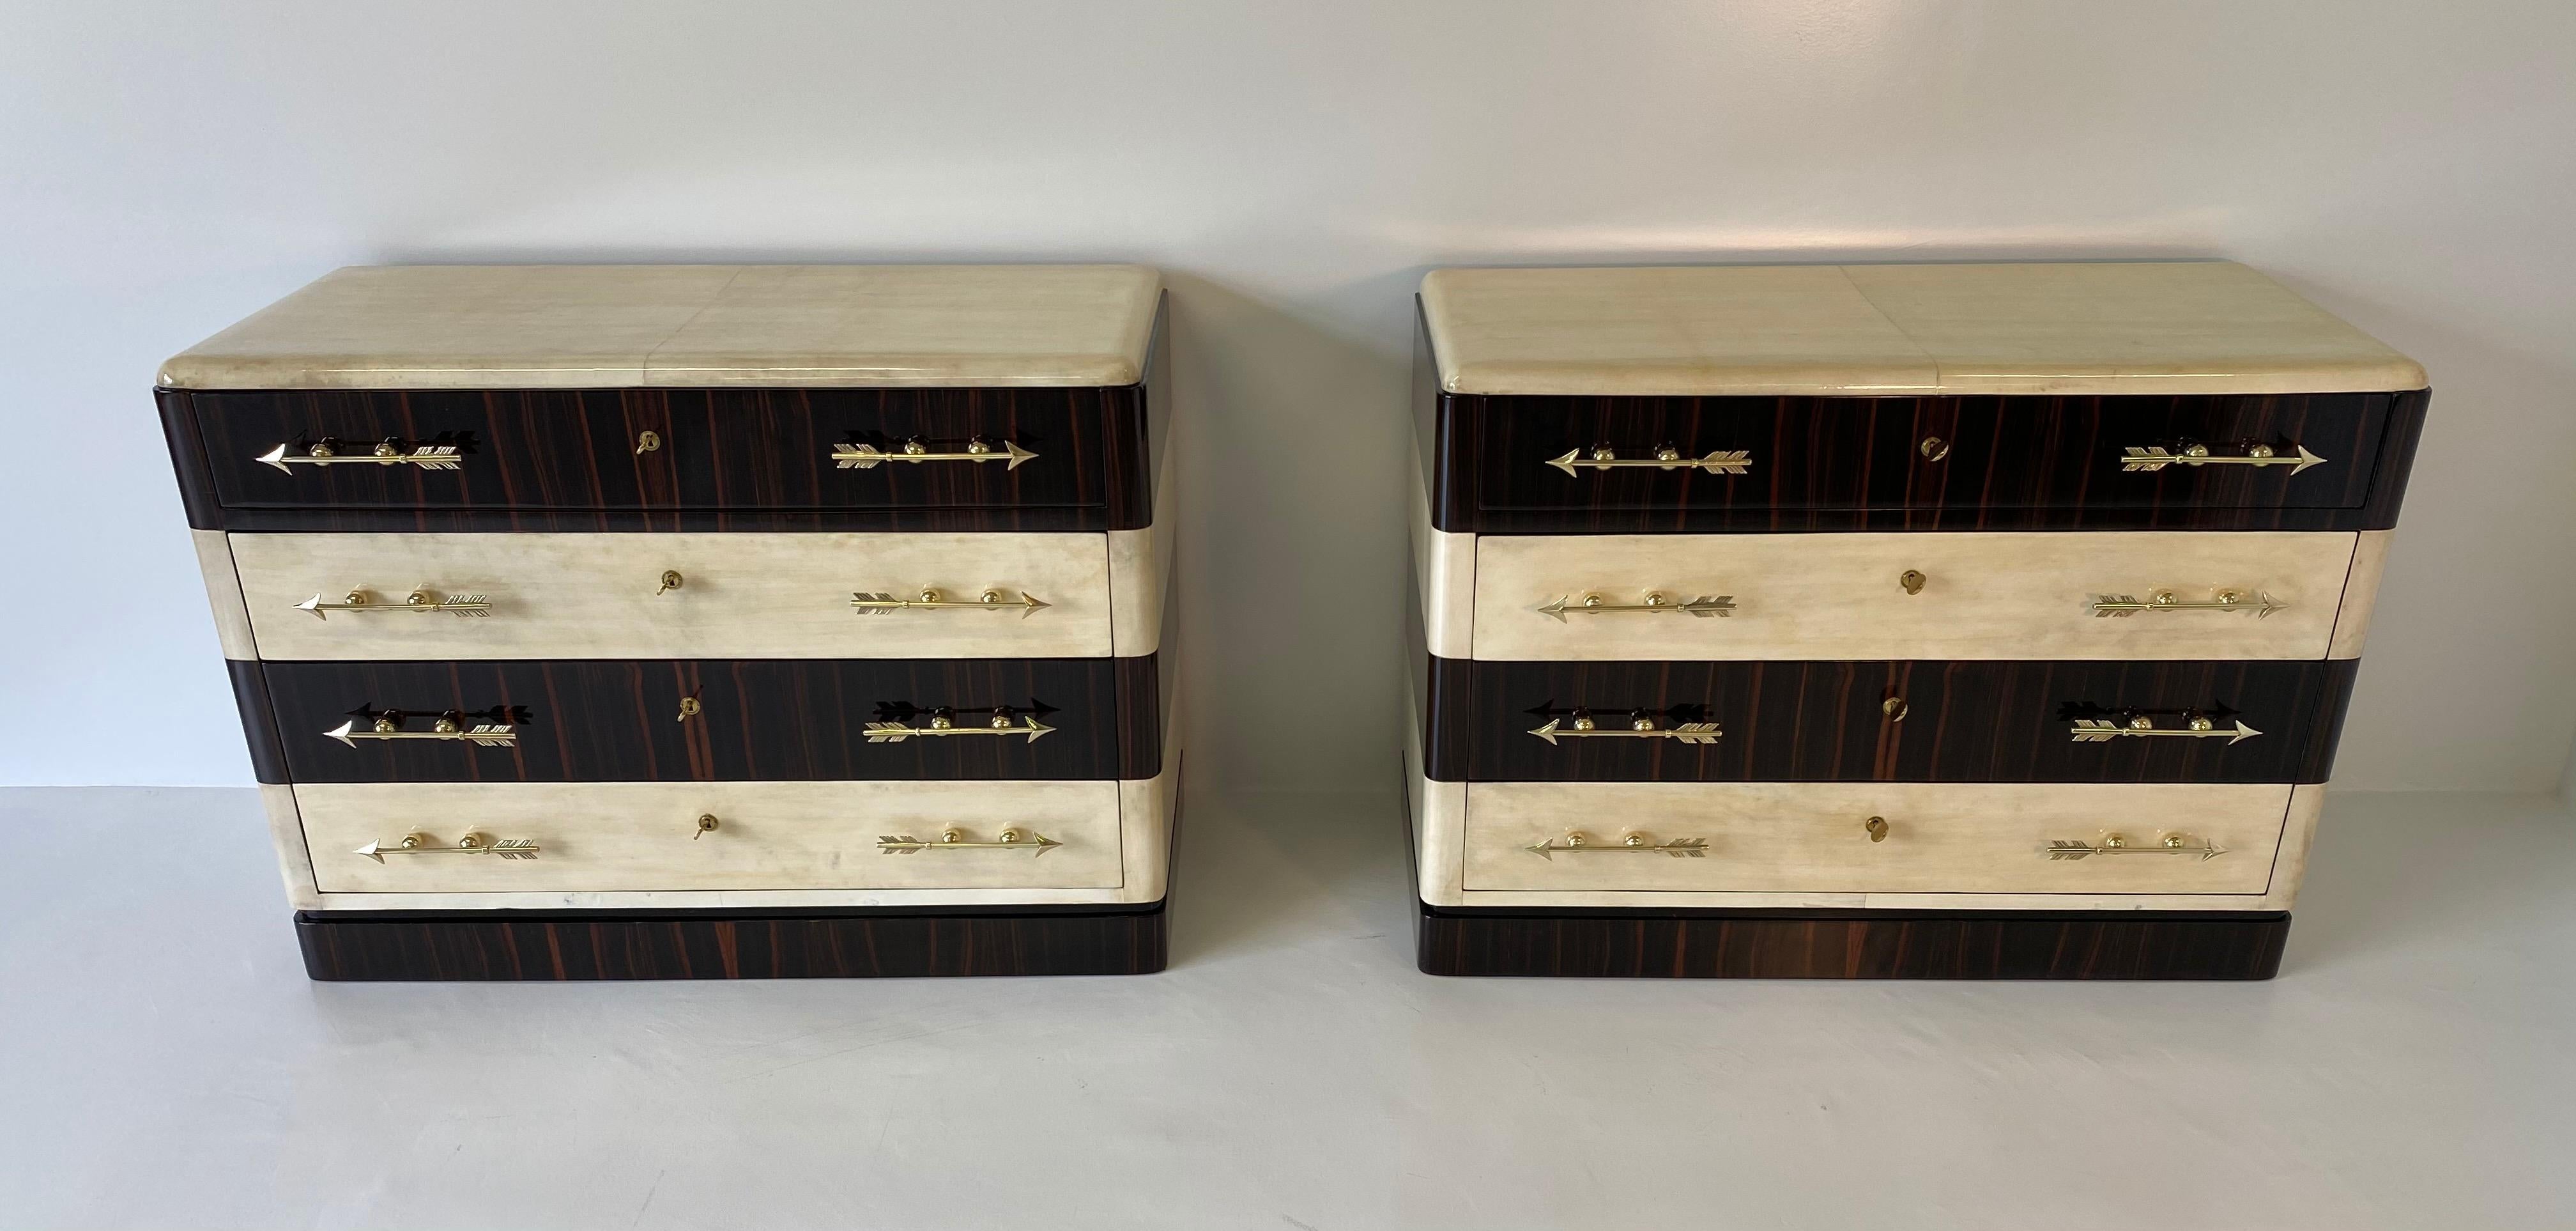 These magnificent Art Deco chest of drawers were produced in the 1930s in Italy.
They are covered in parchment and Macassar creating a unique and elegant visual effect typical of the Art Deco style.
The precious handles are reproductions of arrows